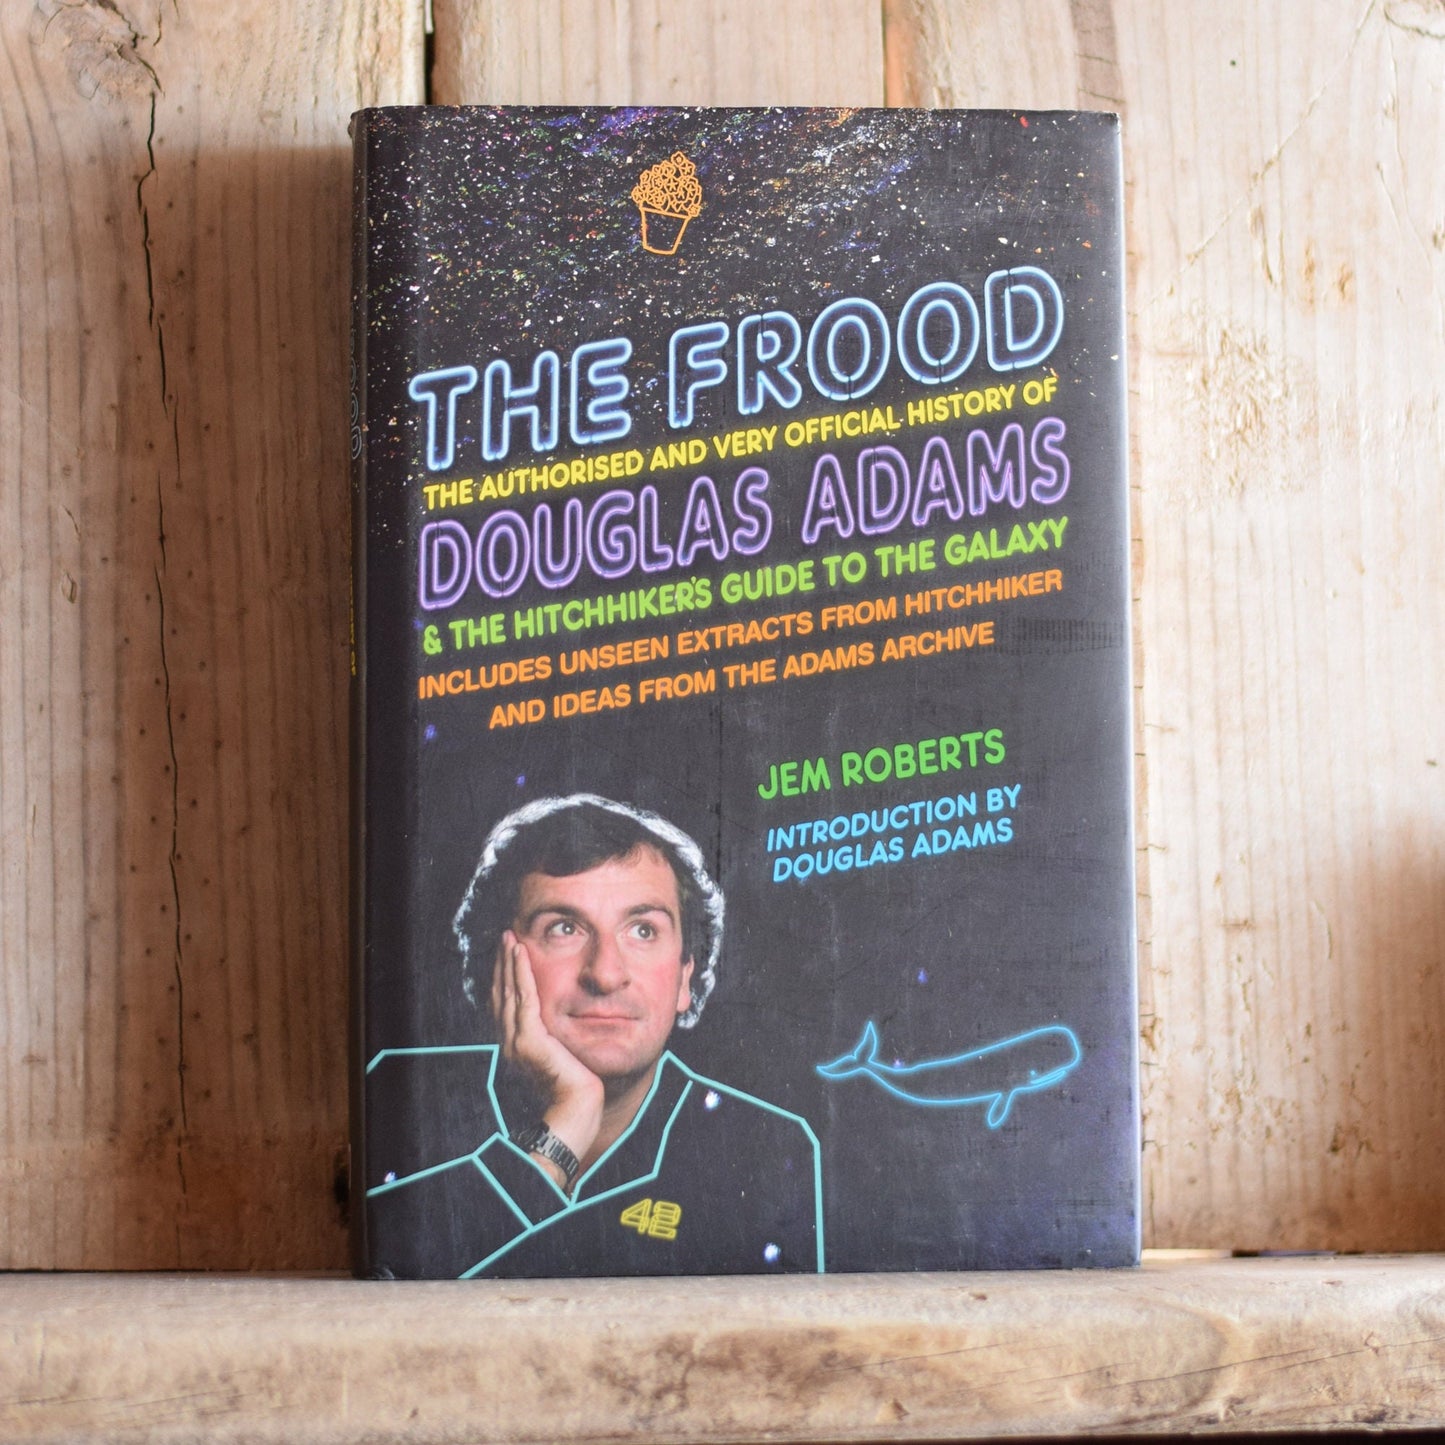 Vintage Non-Fiction Hardback: Jem Roberts - The Frood, The Authorised and Very Official History of Douglas Adams FIRST EDITION/PRINTING